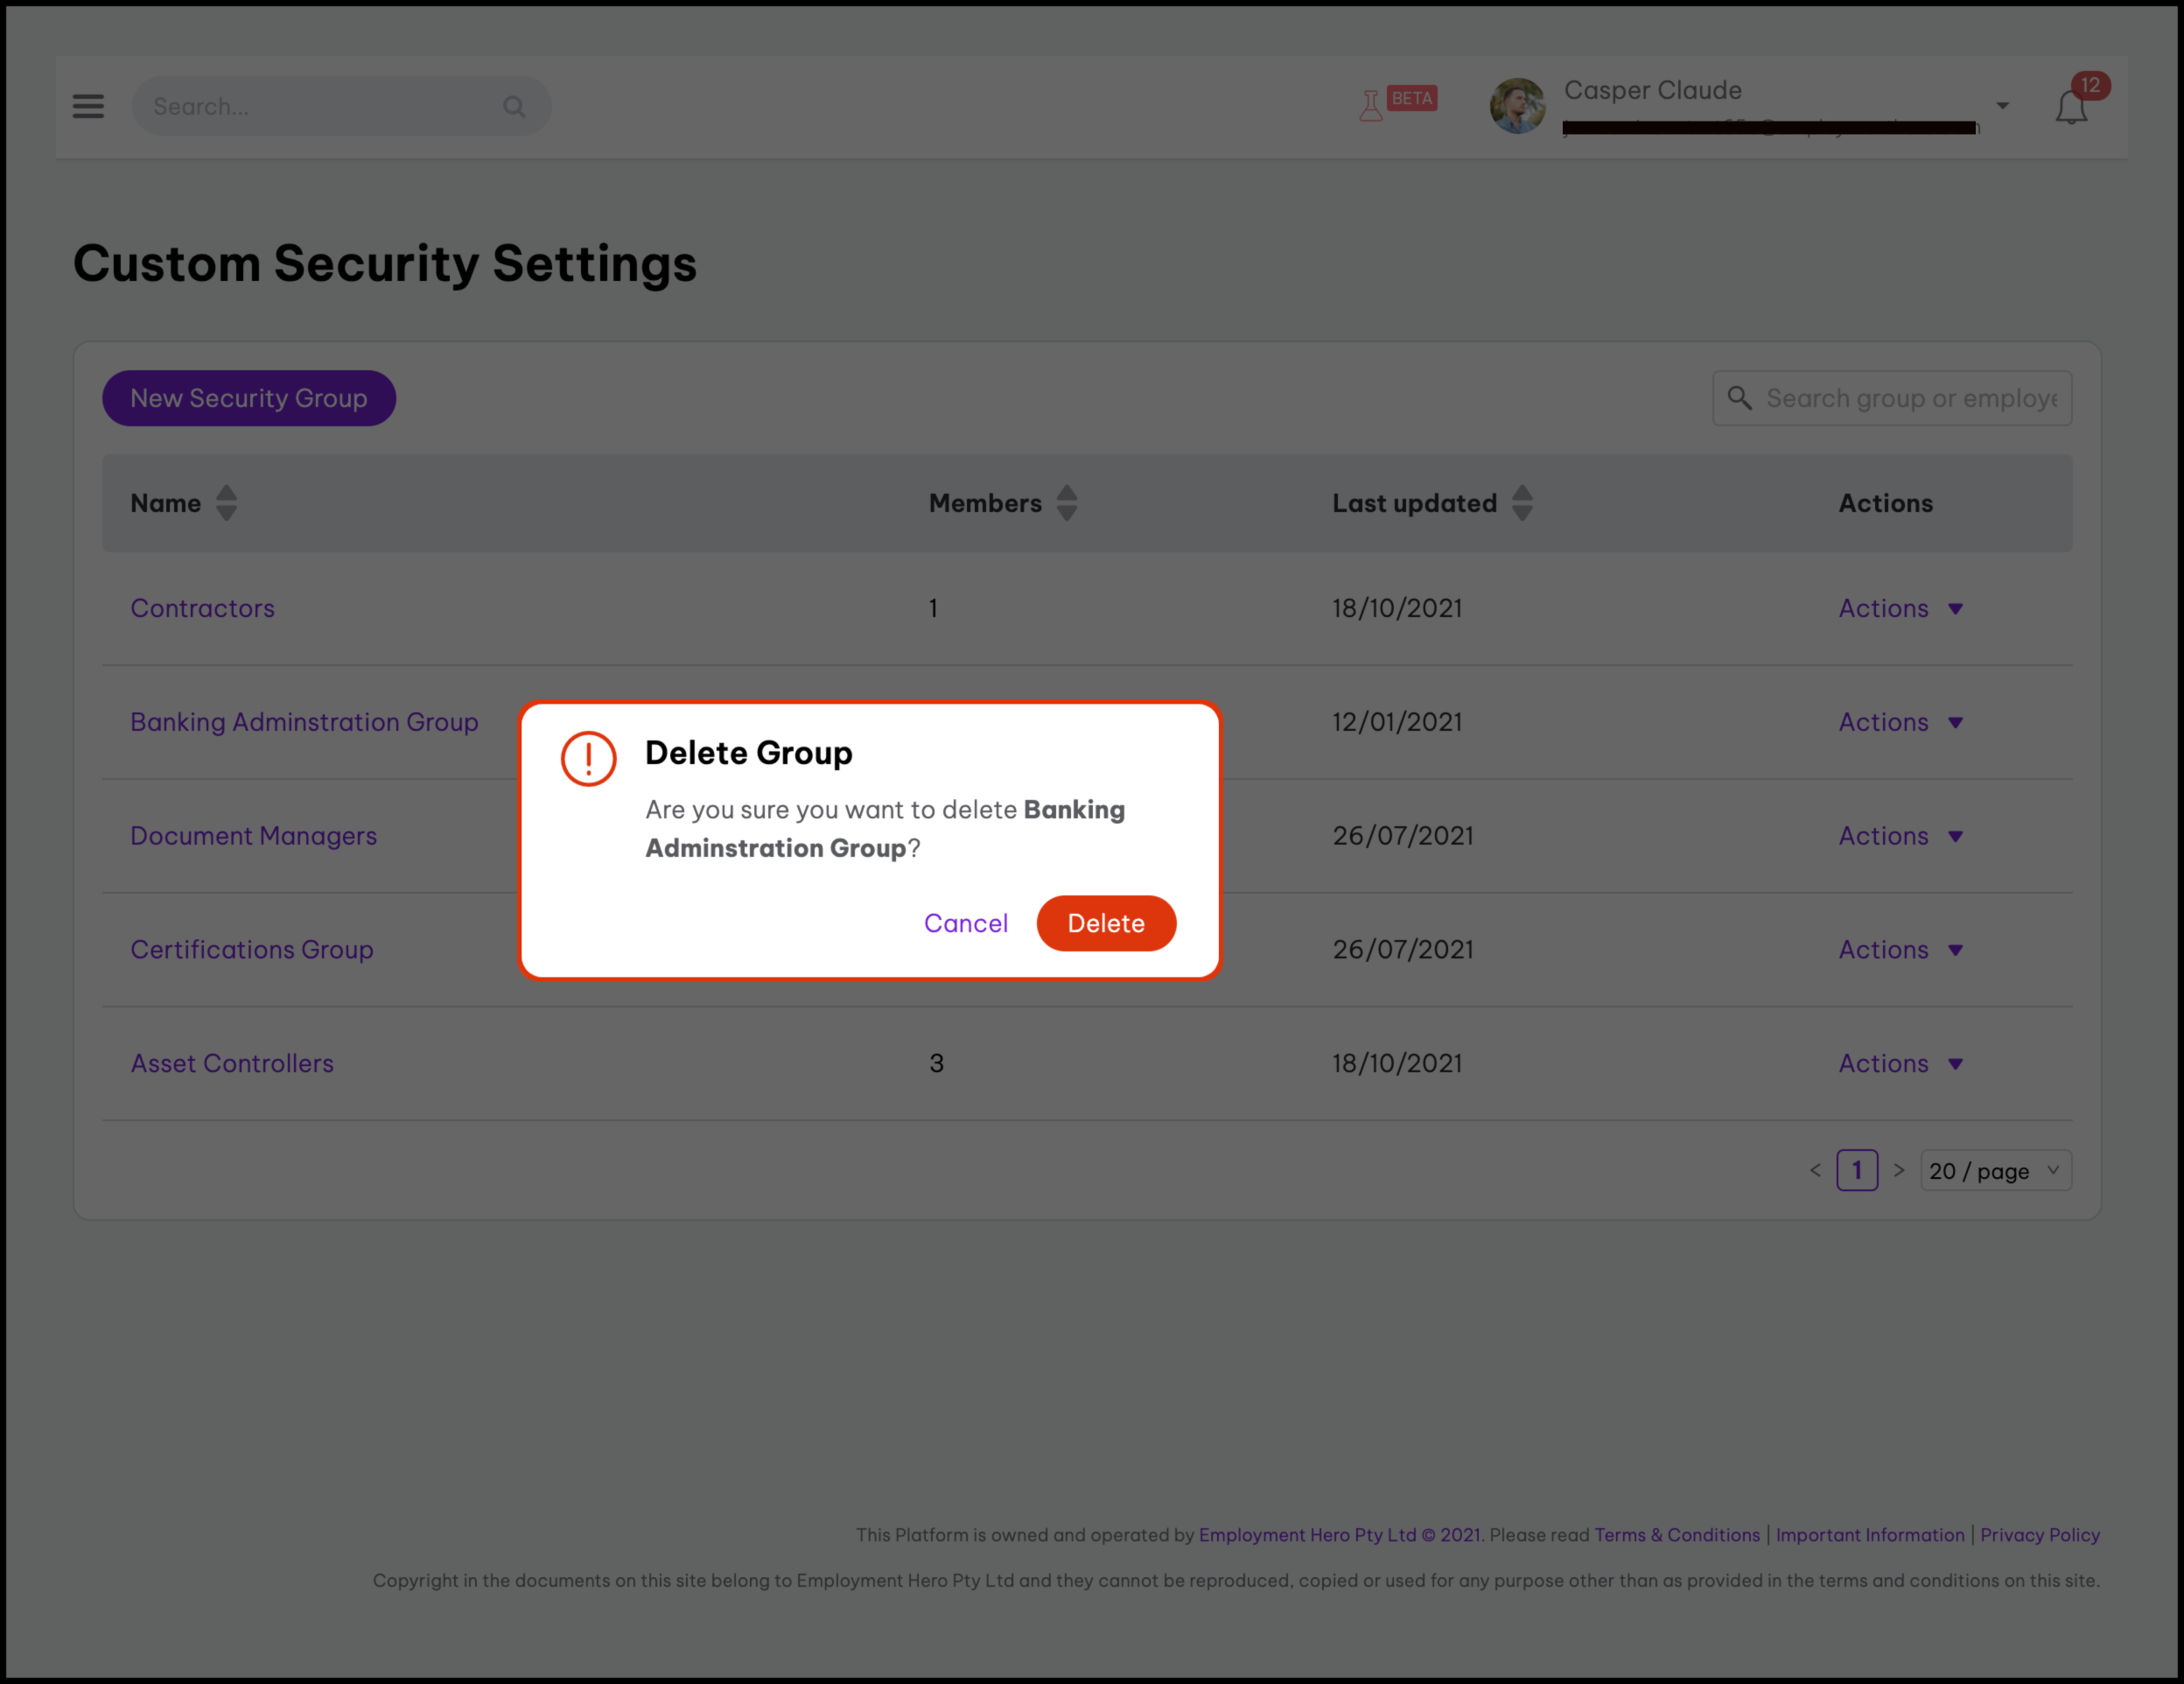 screenshot of the confirmation pop-up to delete the custom security group